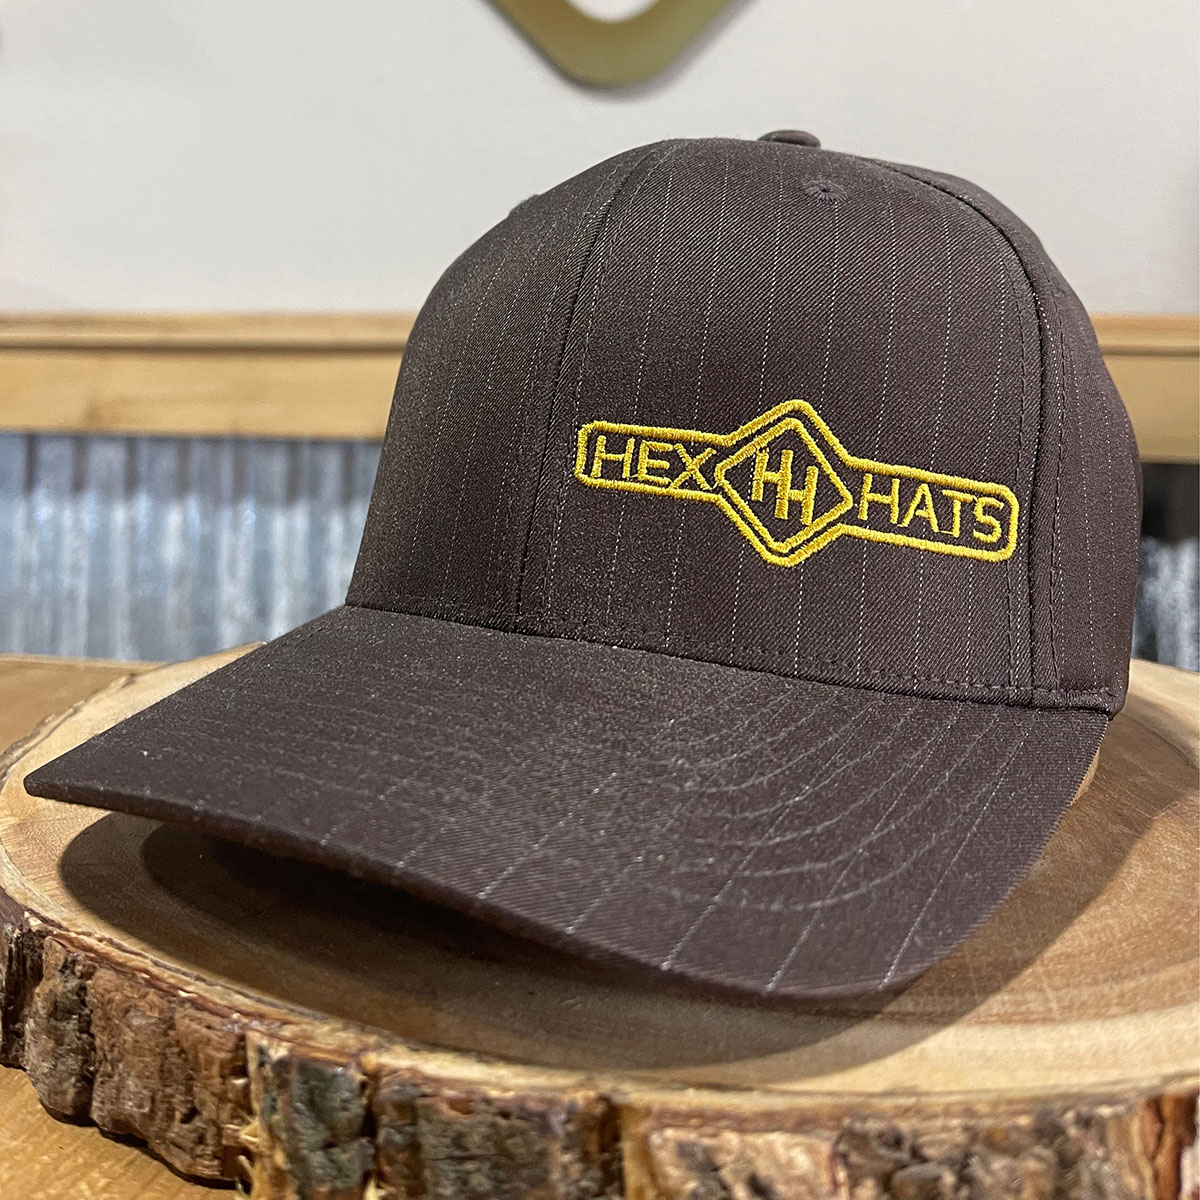 Hex Hats flex pinstripe | Hats More Boots fit Wear, Western and | Co Hex